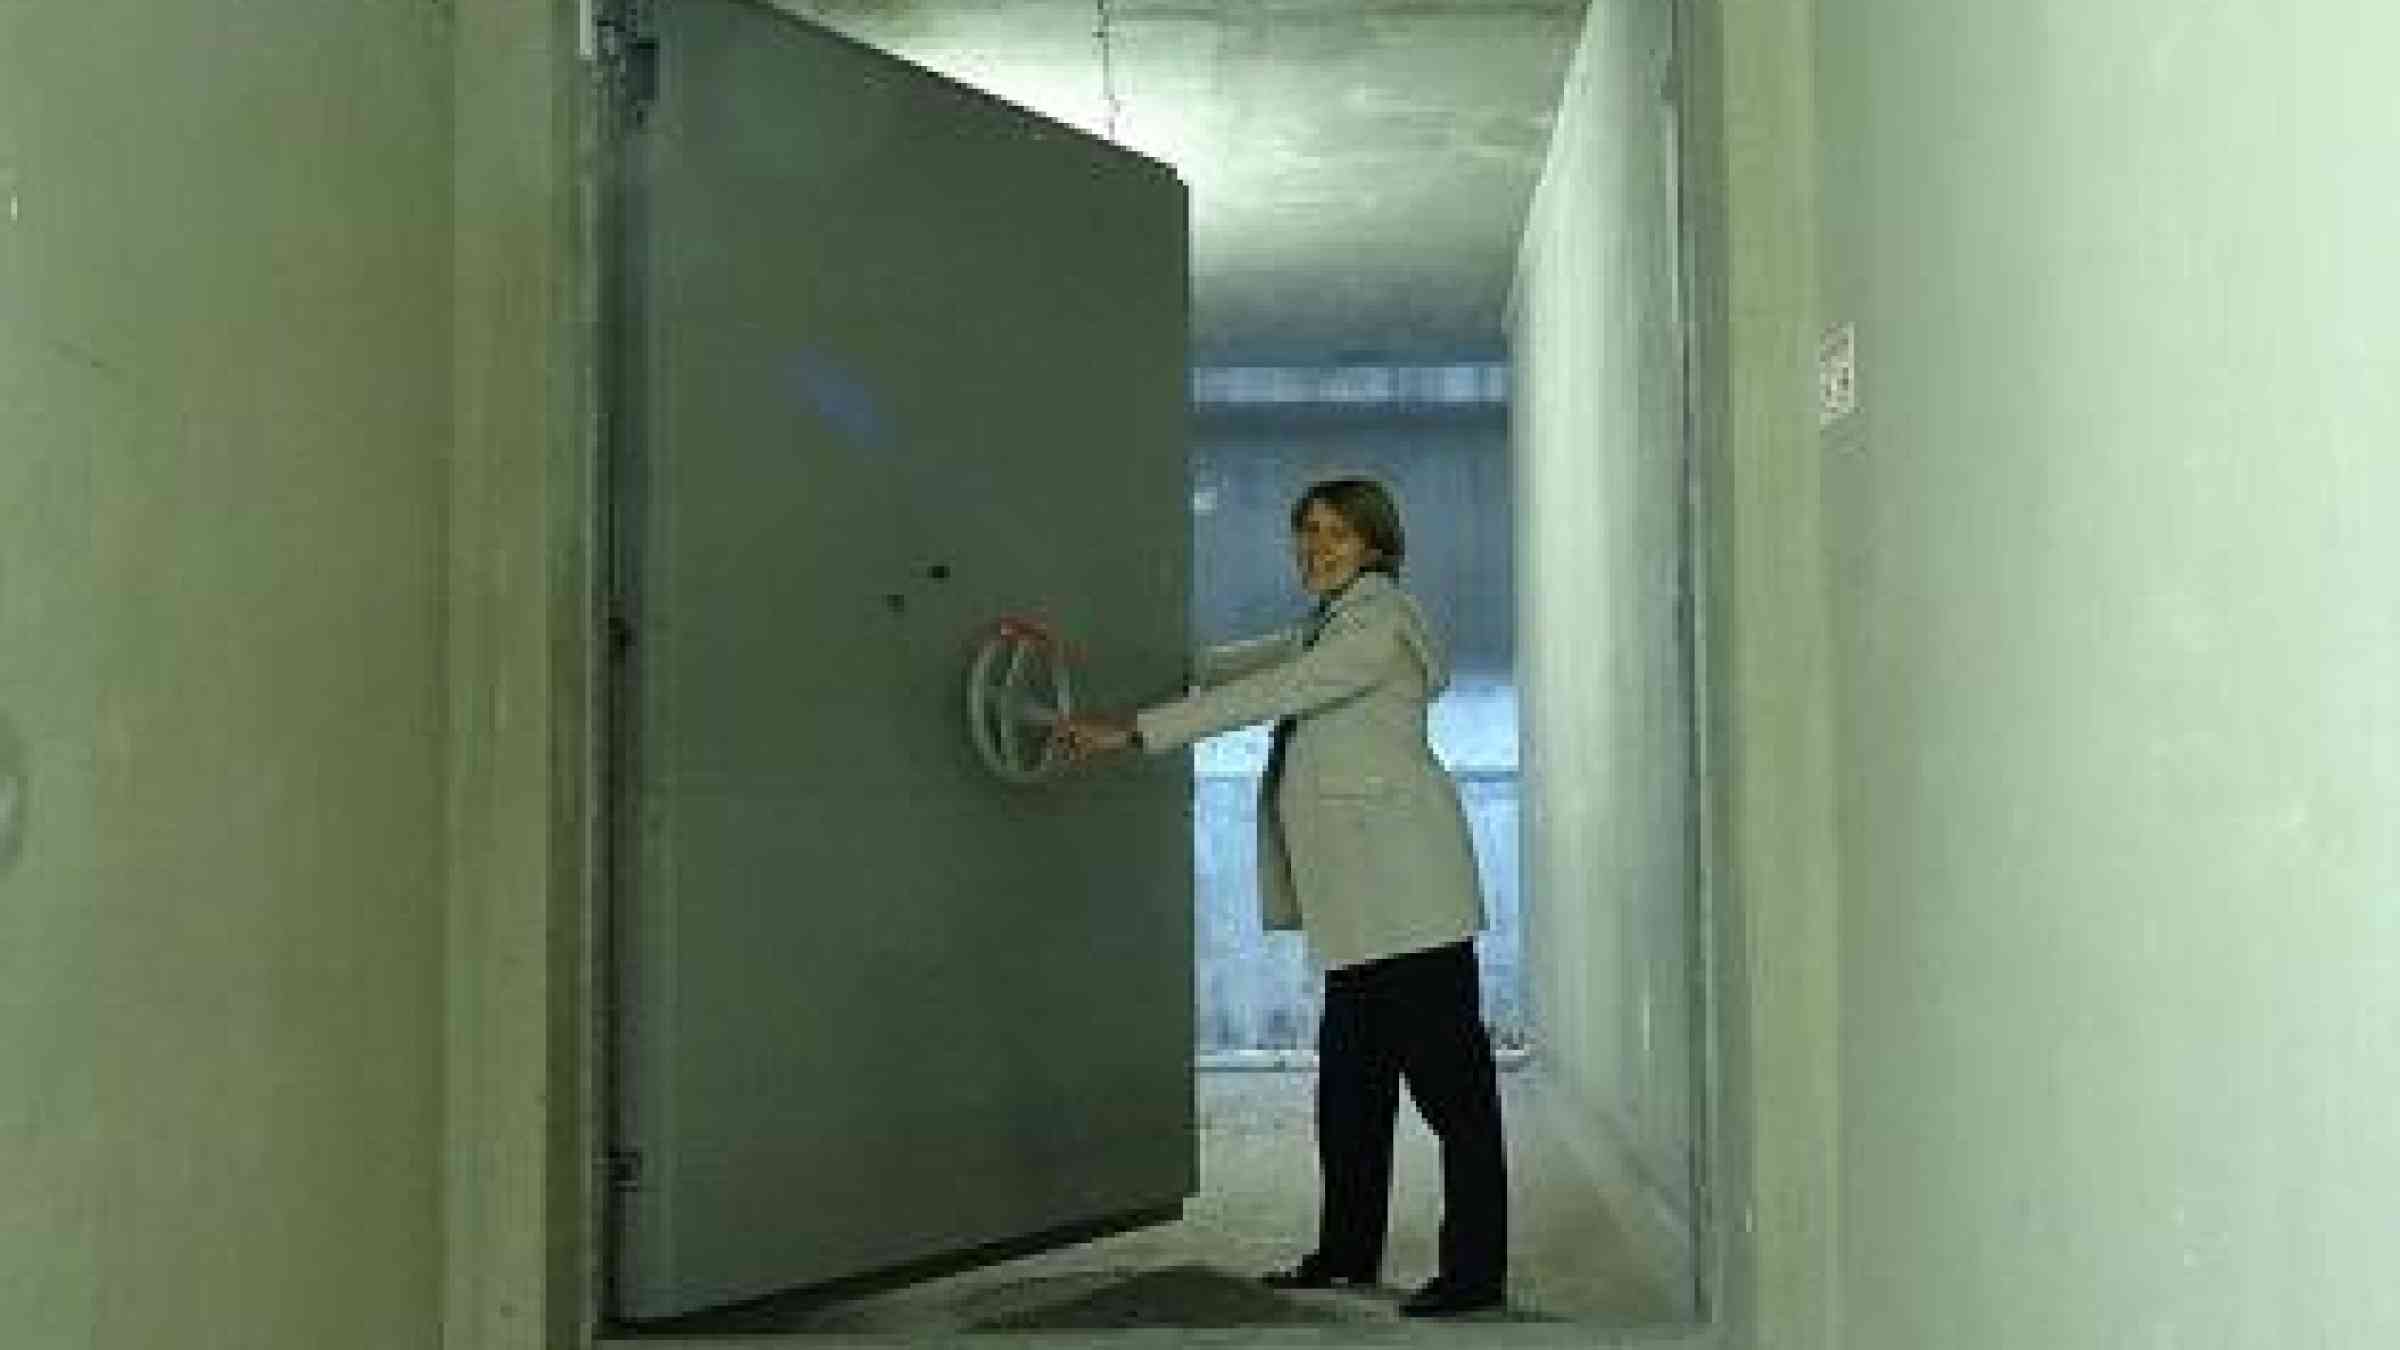 Last line of flood defence: Ms. Sophie Lemonnier, architectural, museography and technical director of the Louvre Museum demonstrates the site's watertight doors (Photo: UNISDR).